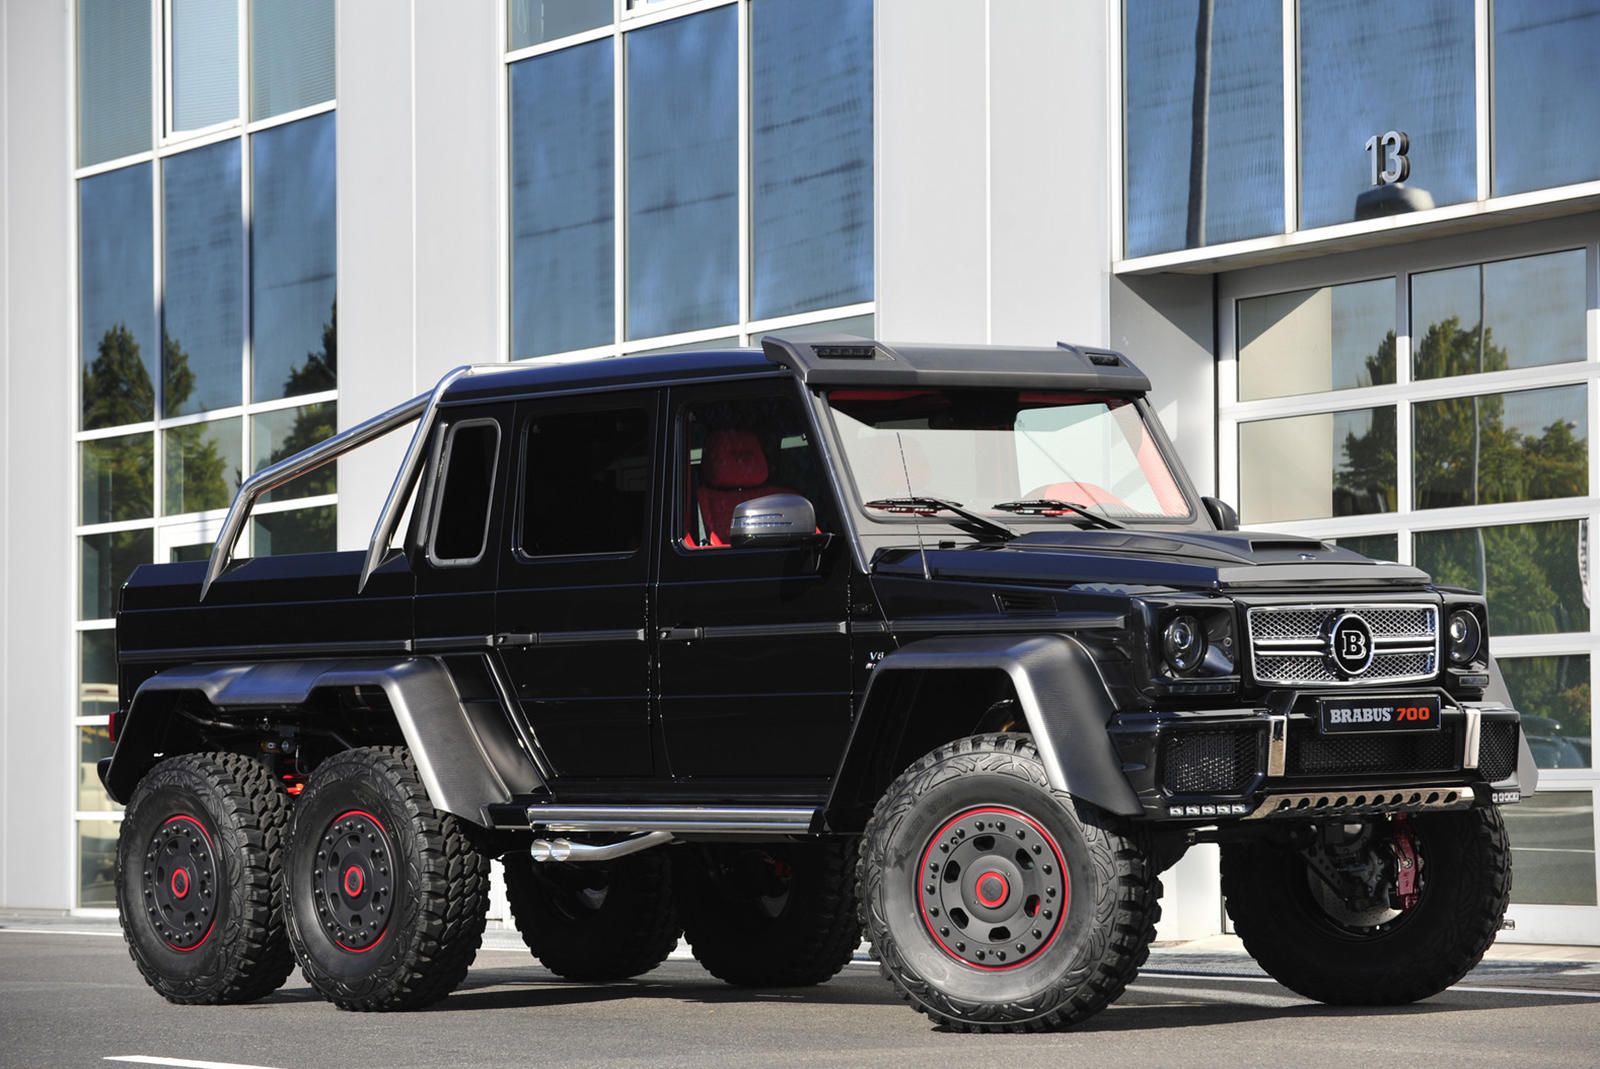 10 Best And Craziest Brabus Mercedes-Benz Cars Ever Made